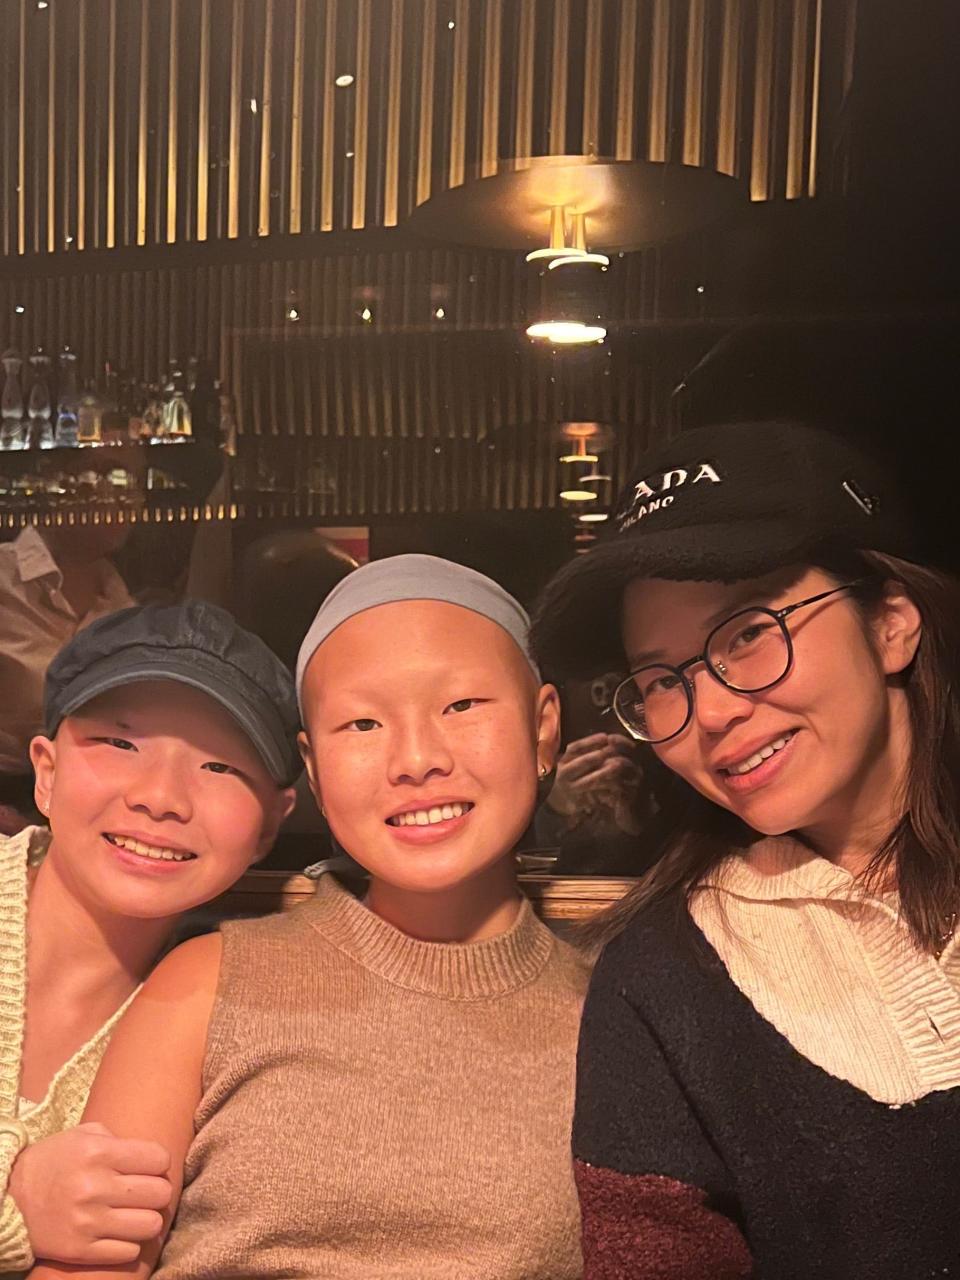 From left to right:  Madeline Lee, 13, her older sister Alison Lee, 17, and her mother Julie Yoo, 47.